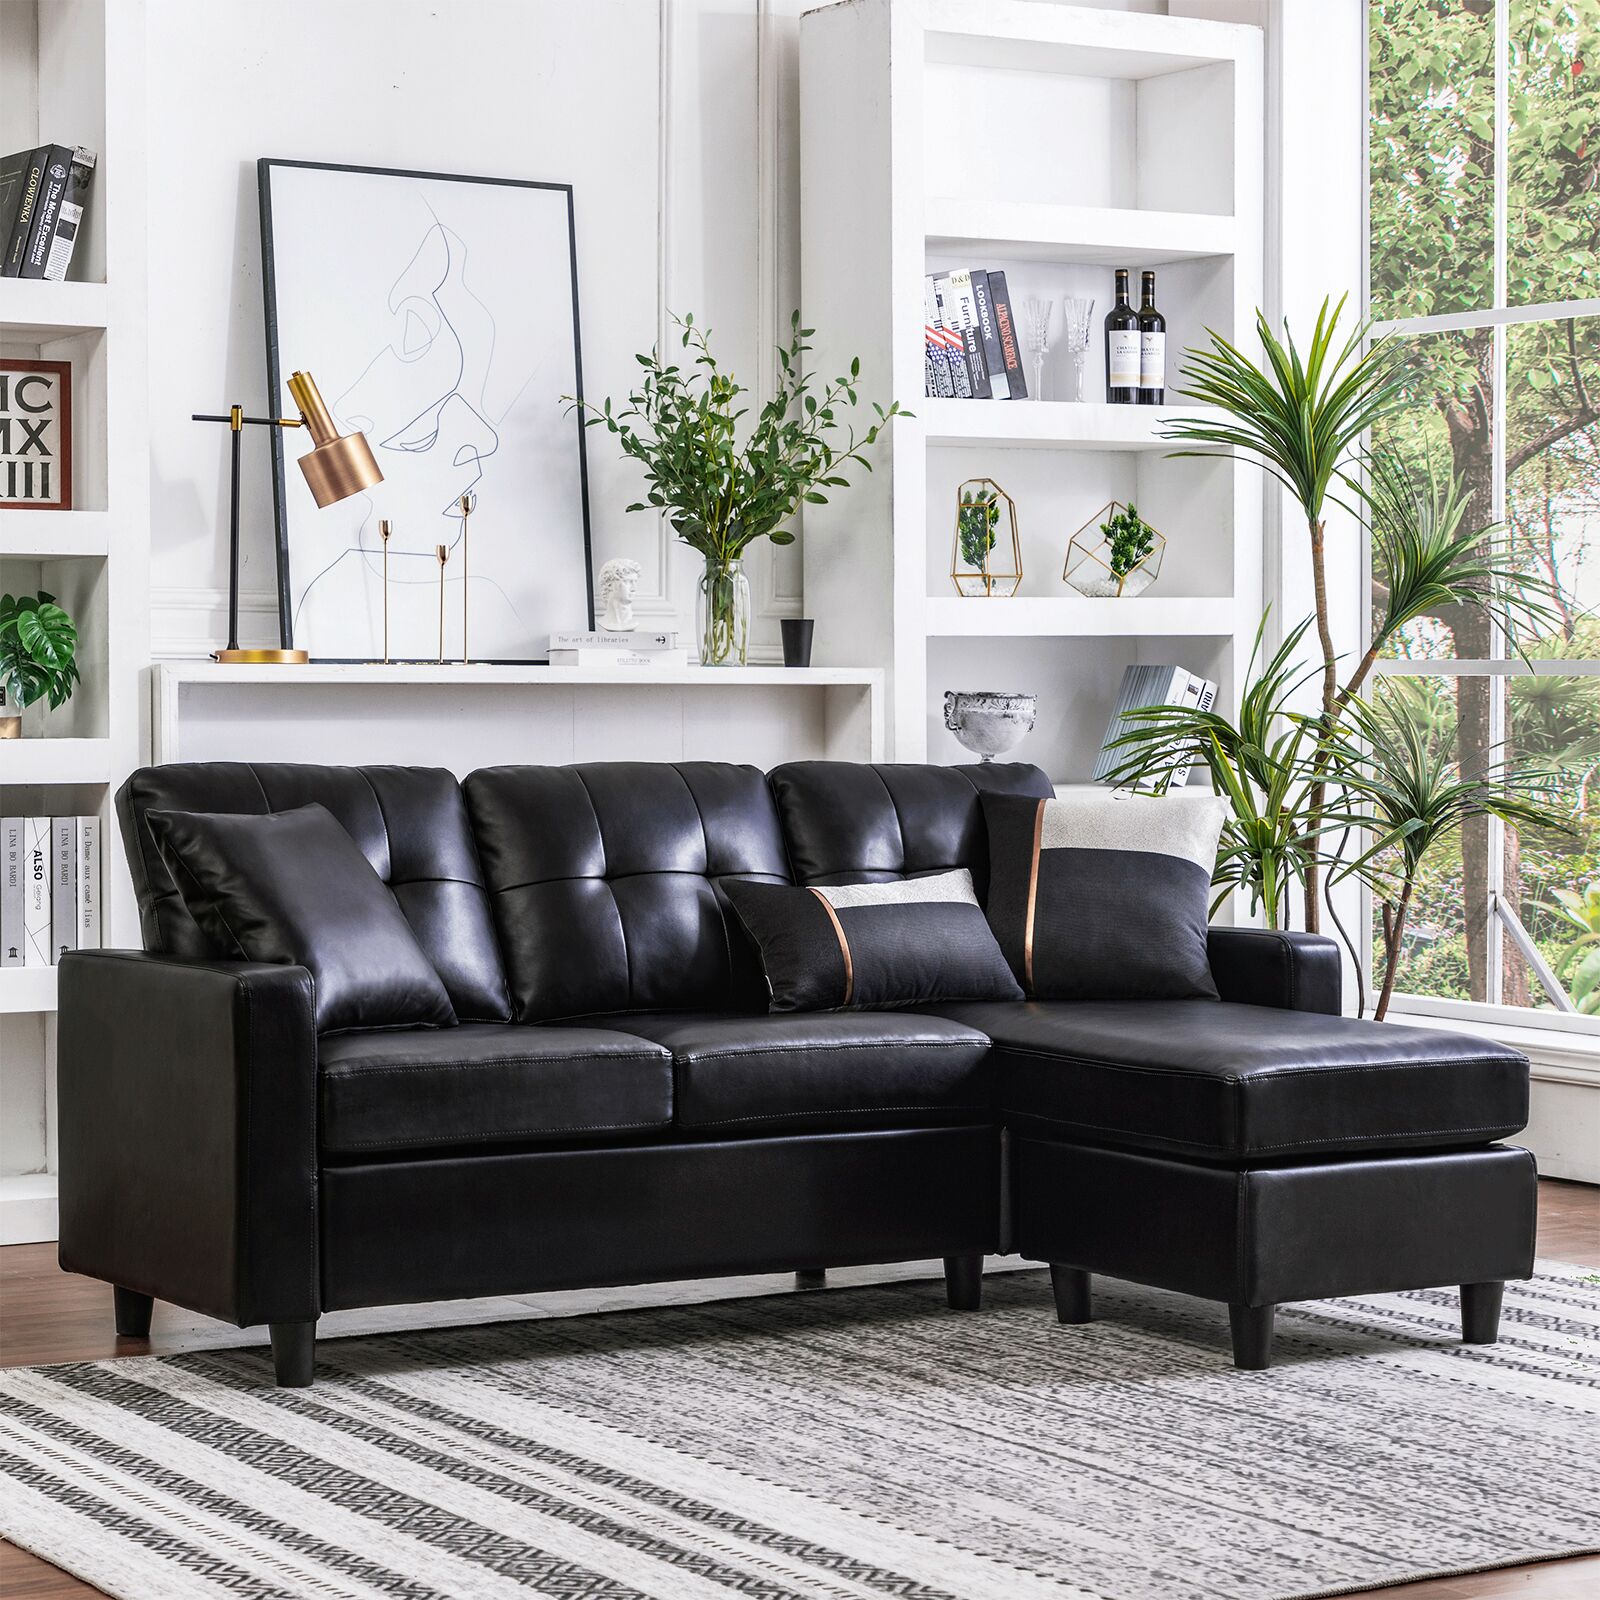 Faux Leather Sectional Sofa L Shaped Couch Reversible Chaise Small Space Black EBay